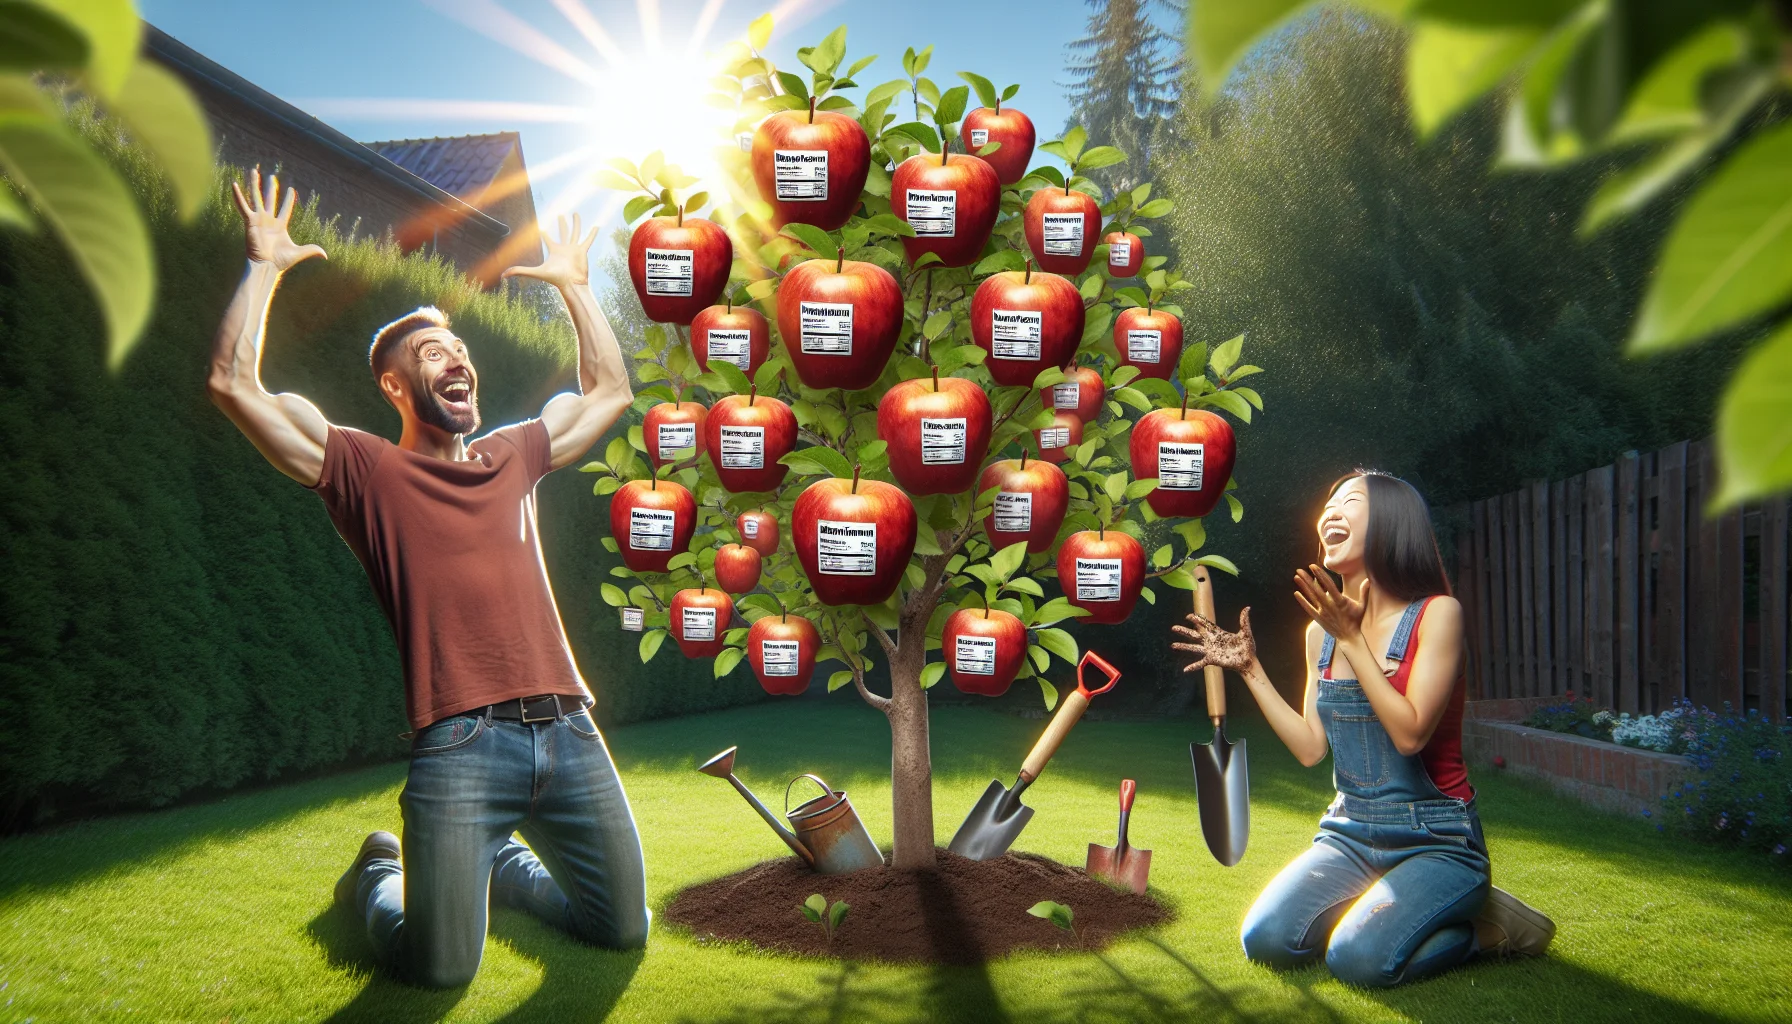 Imagine a humorous and delightful scene in a verdant home garden. Beaming sun adds warmth to the scene where an apple tree alooms, laden with radiant red apples. The apples unbelievably flash nutritional information as if they're food product labels. Laughing figures of diverse backgrounds, a Caucasian male and an Asian female, observing in awe, hold gardening tools, suggesting they have taken part in nurturing the tree. They wear casual gardening clothes, and their hands are playfully smudged with dirt, symbolizing their active participation in gardening and connection with nature.